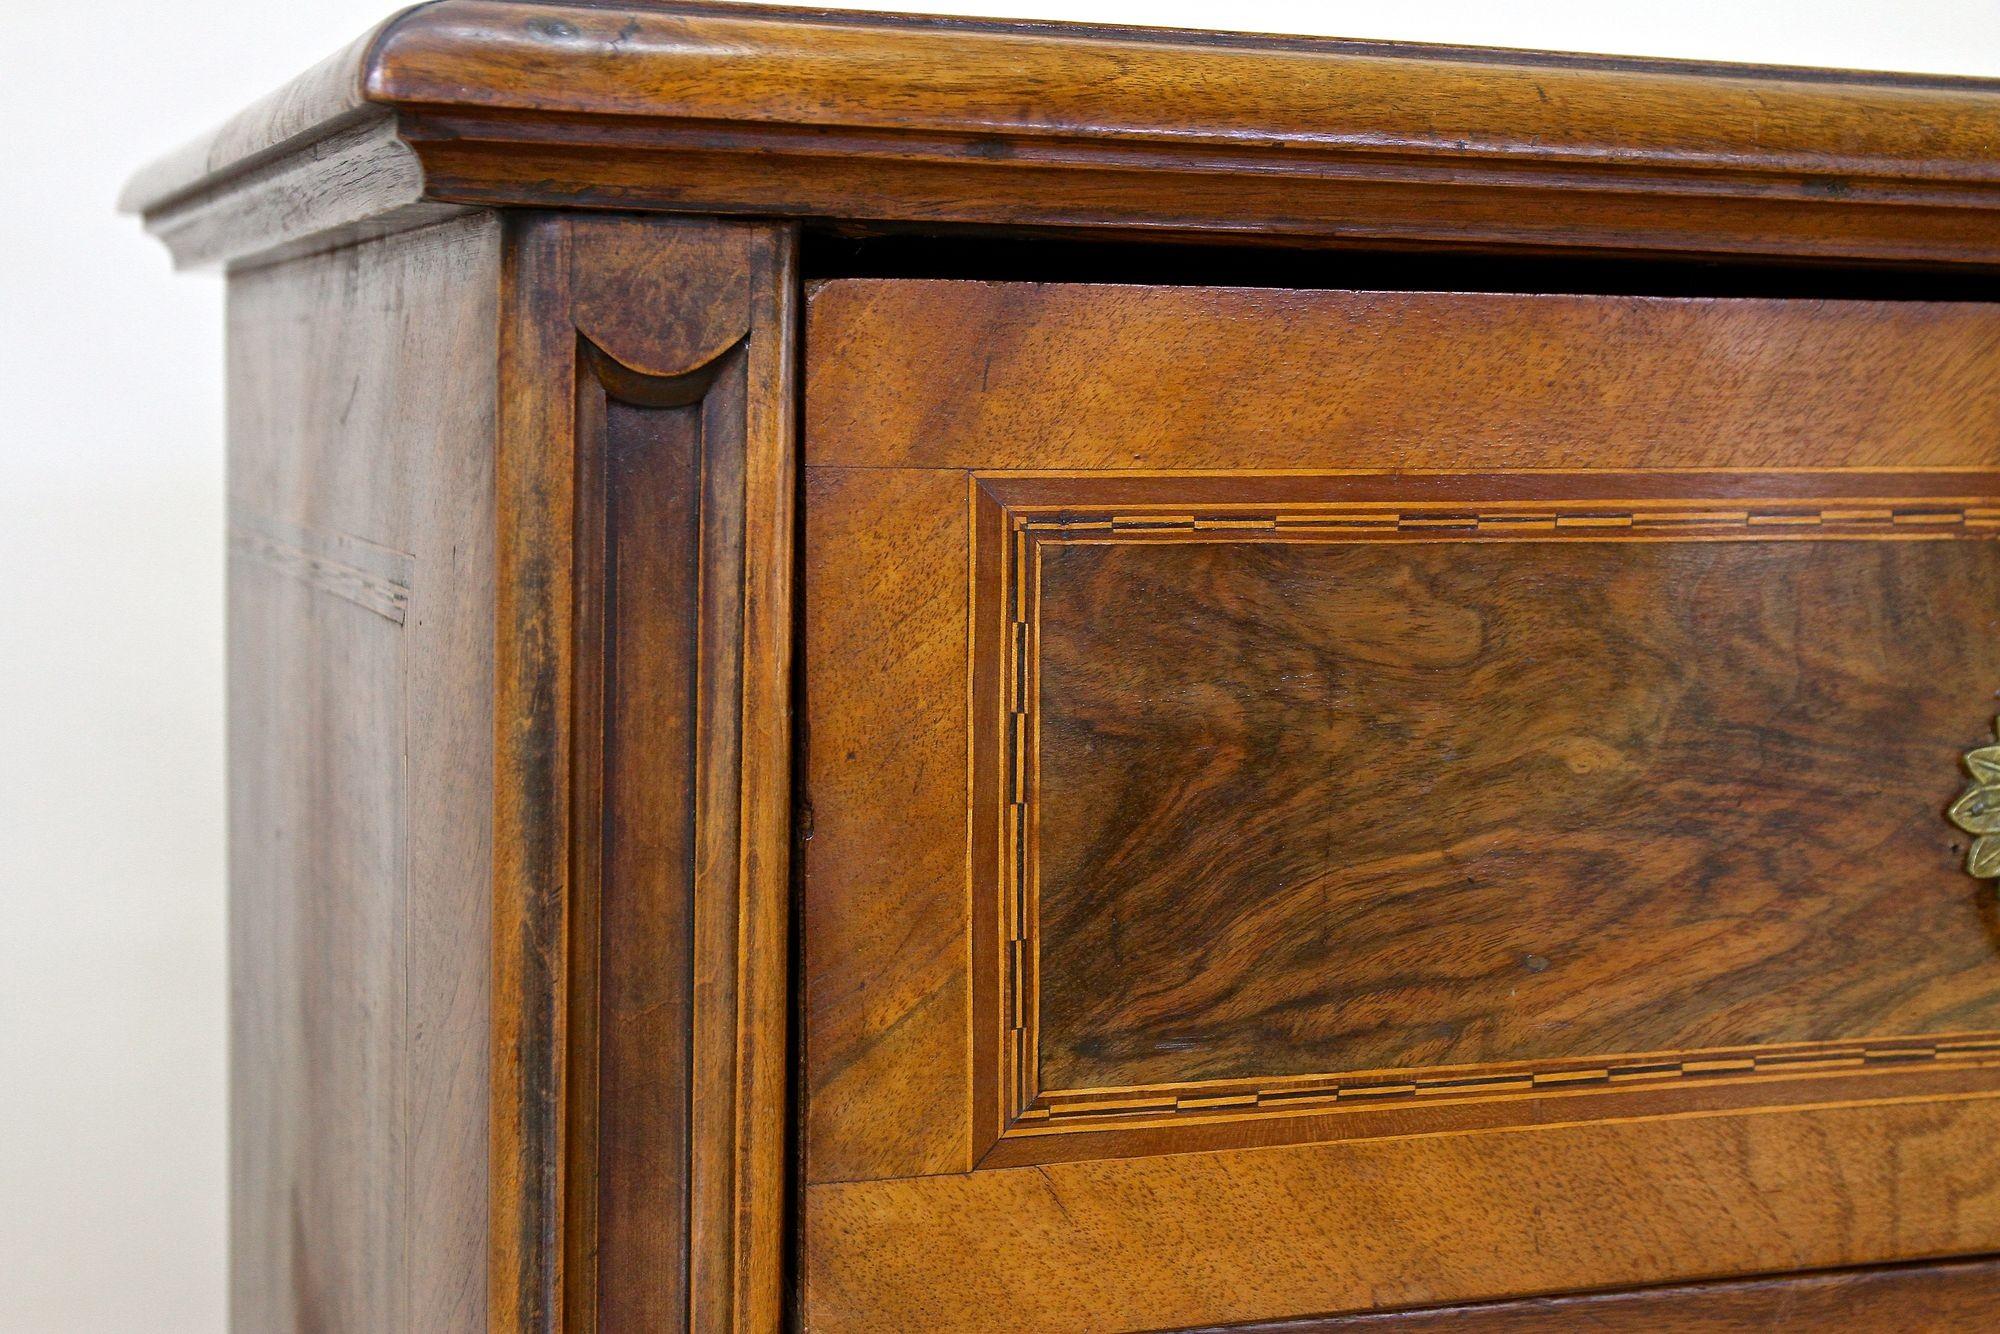 19th Century Biedermeier Nutwood Chest Of Drawers With Micro-Inlays, AT ca. 1850 For Sale 2